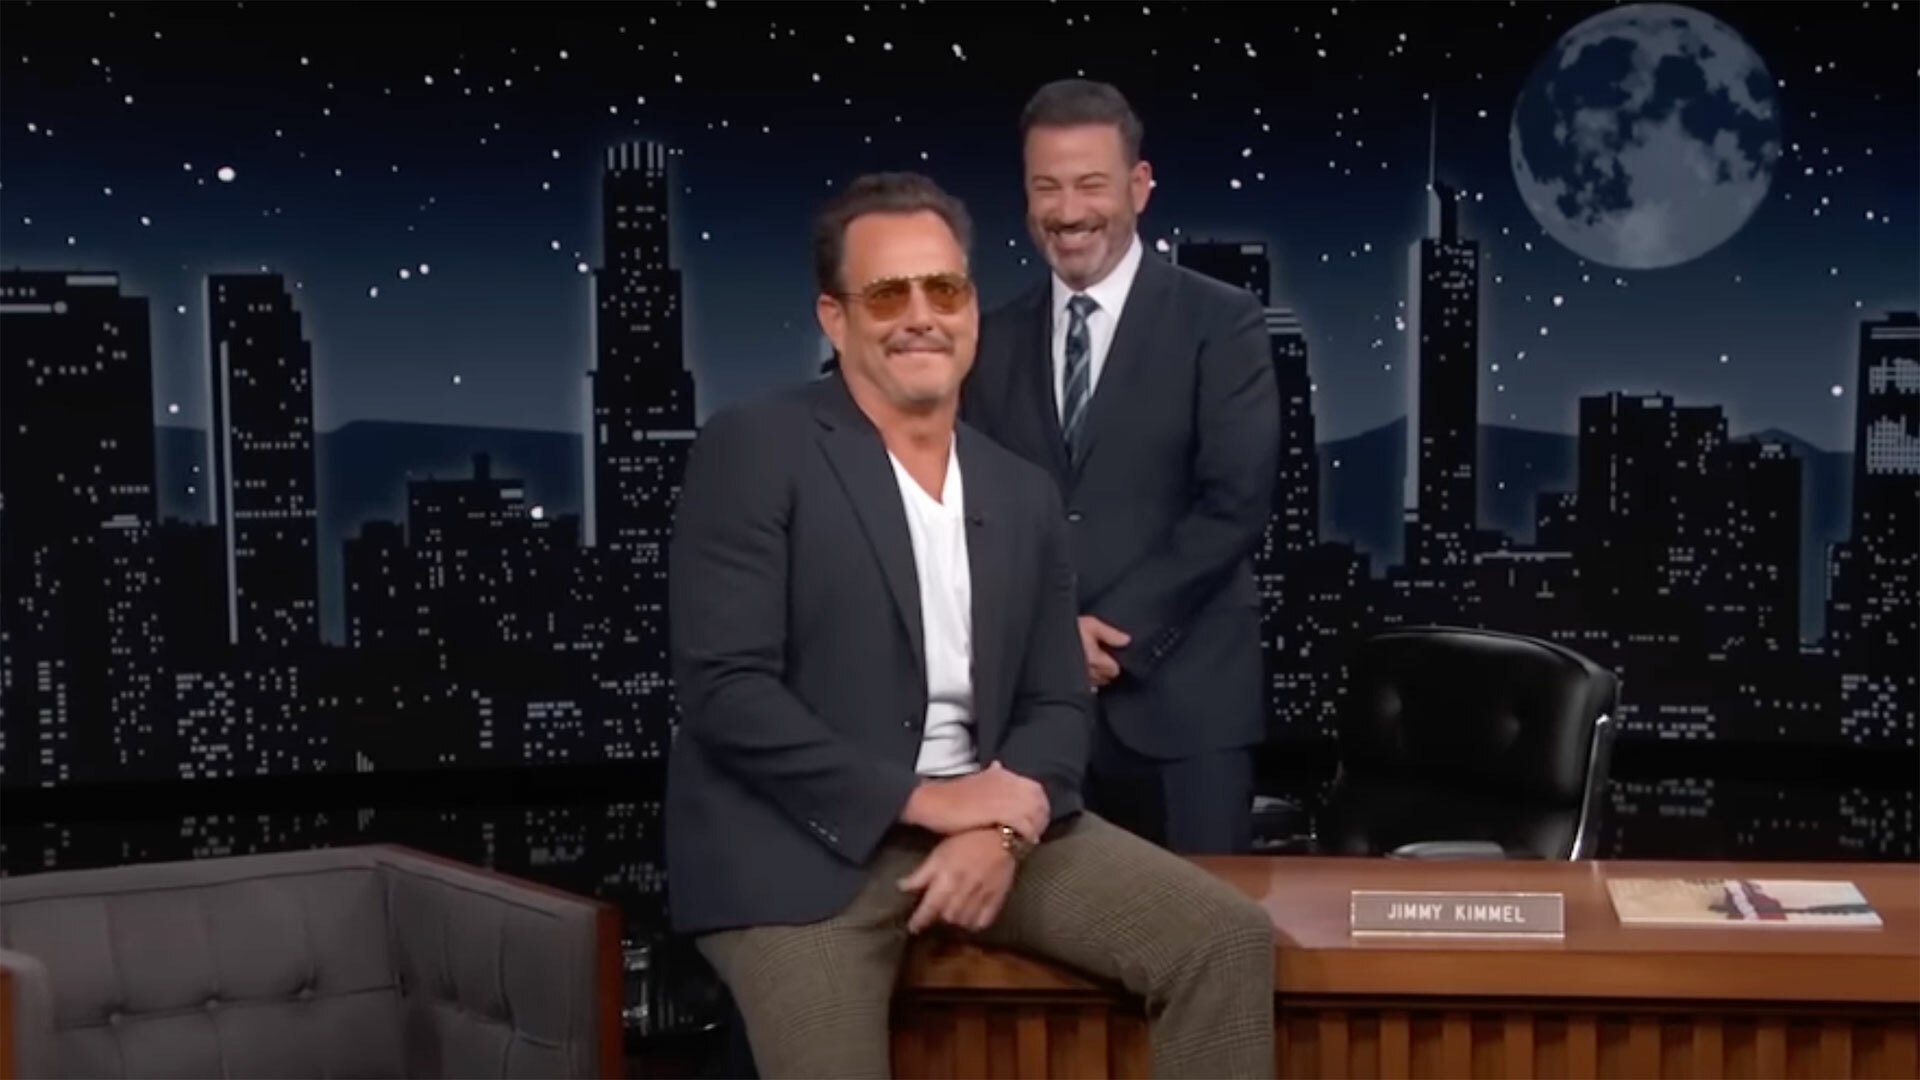 A man in sunglasses sits on a talk show desk while another man in a suit stands behind laughing.